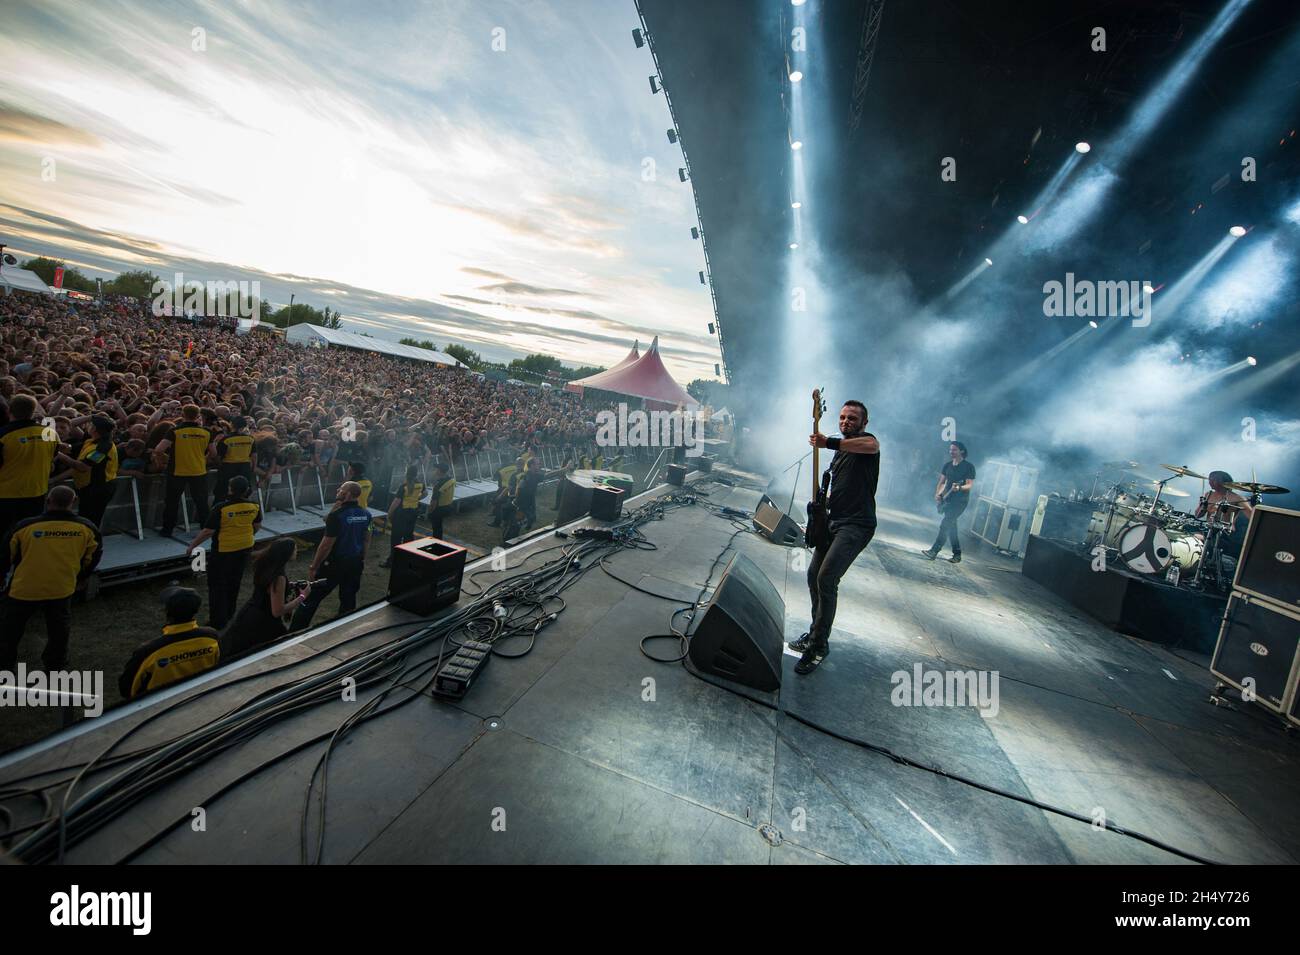 Joe Duplantier, Mario Duplantier, Christian Andreu and Jean-Michel Labadie  of Gojira performing live on stage at Bloodstock festival on August 13 2016  at Catton Hall, United Kingdom Stock Photo - Alamy